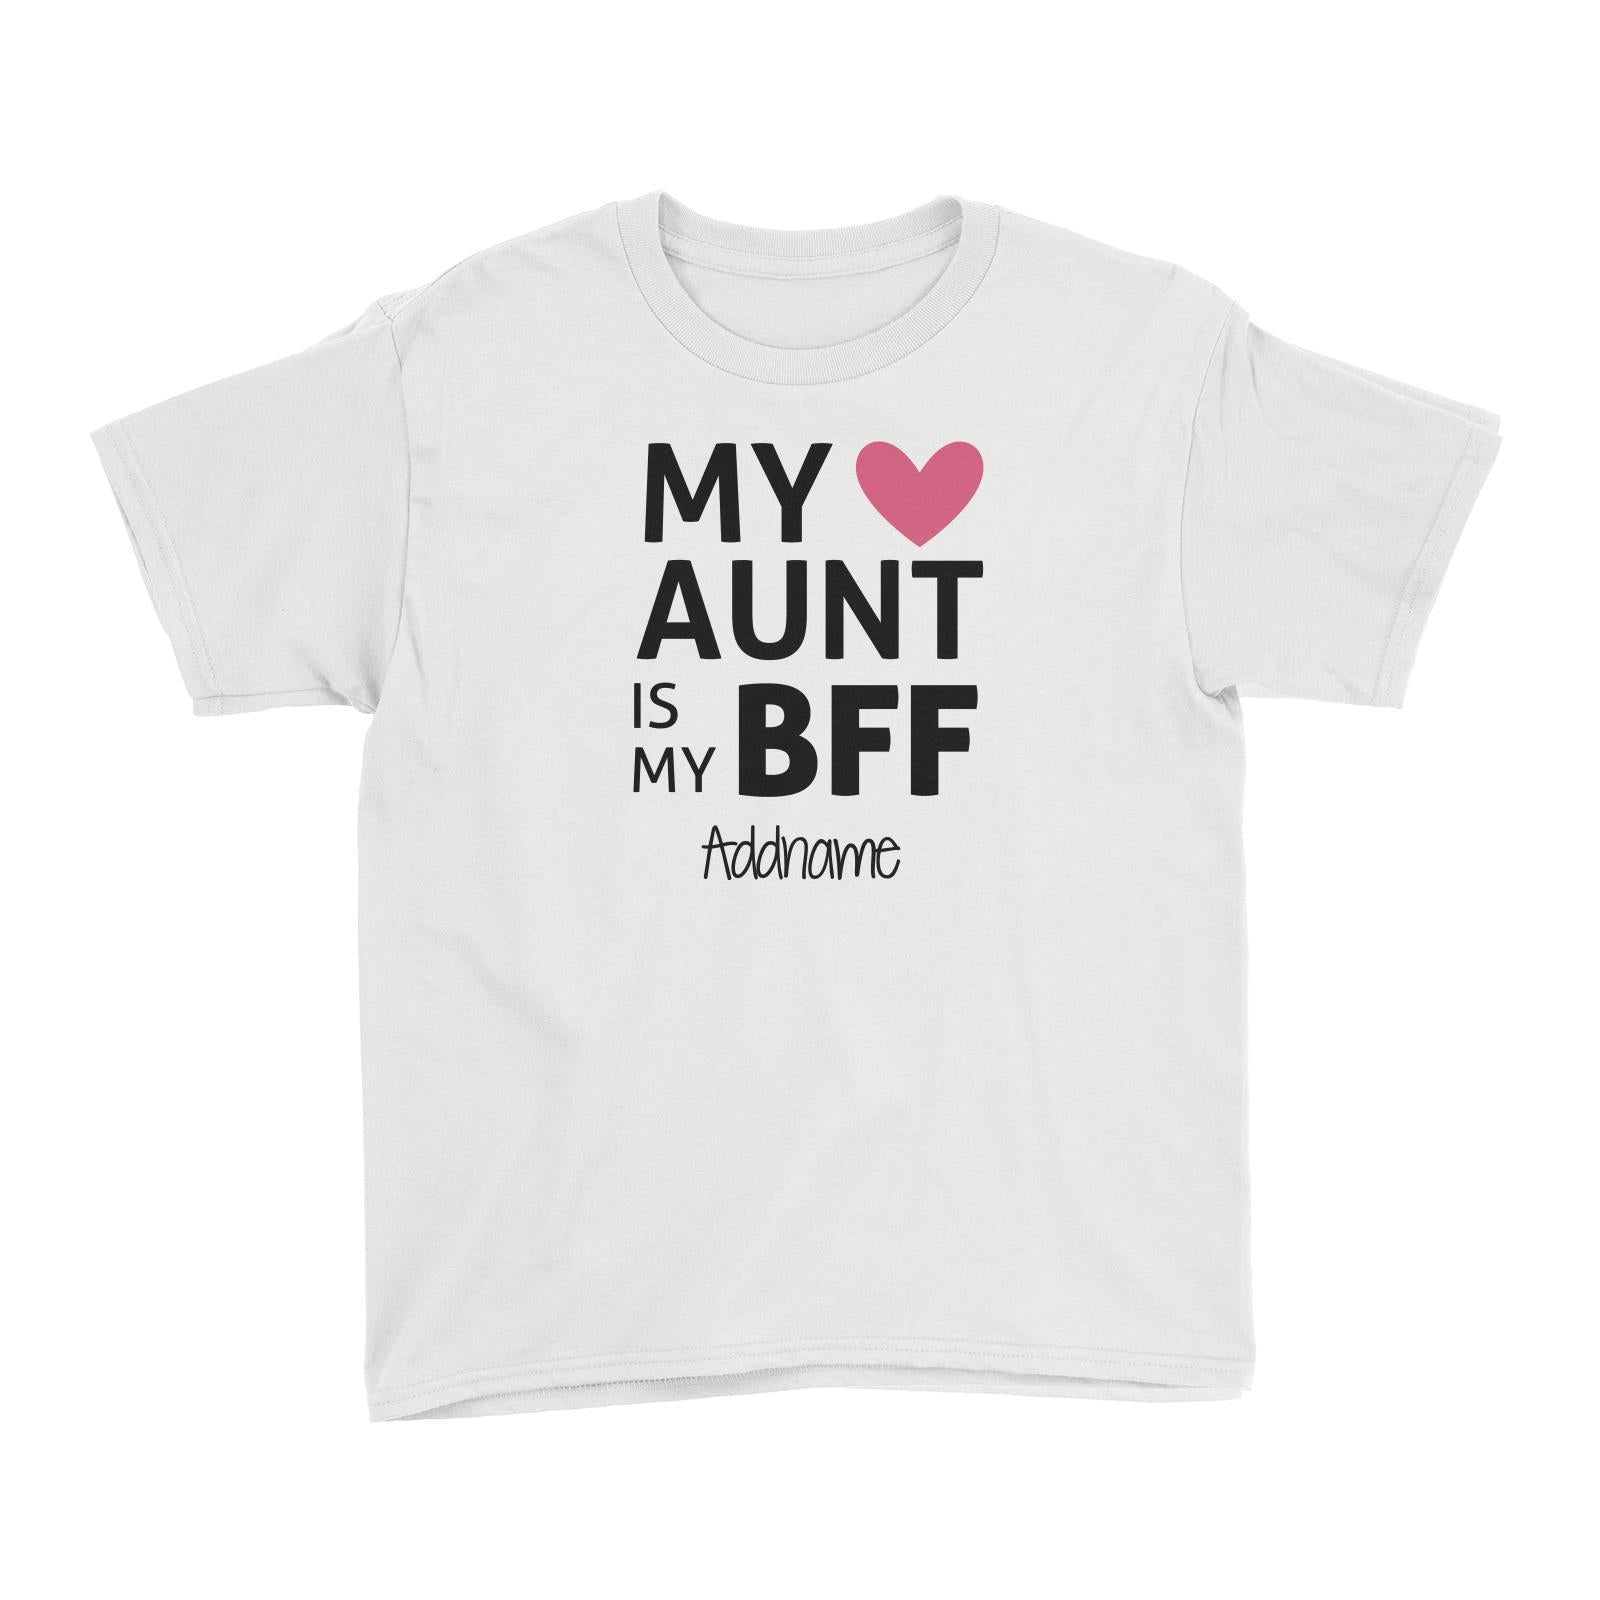 My Aunt Is My BFF Addname Kid's T-Shirt